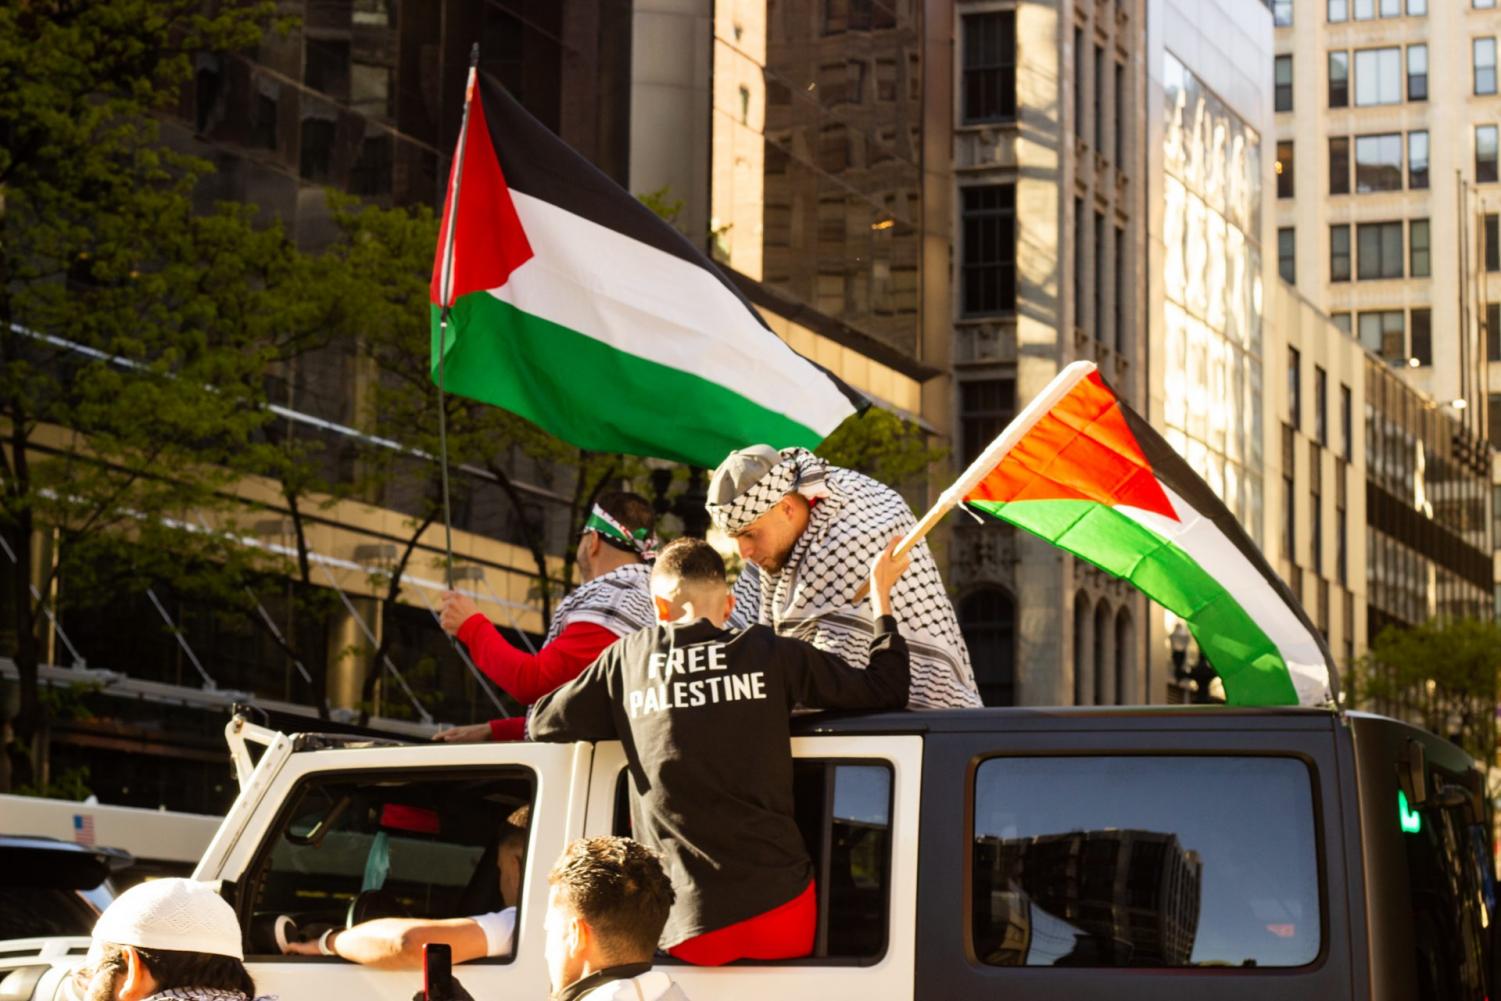 Thousands+participate+in+Sheik+Jarrah+rally+downtown+to+show+support+for+Palestinians+amid+ongoing+Israeli+apartheid